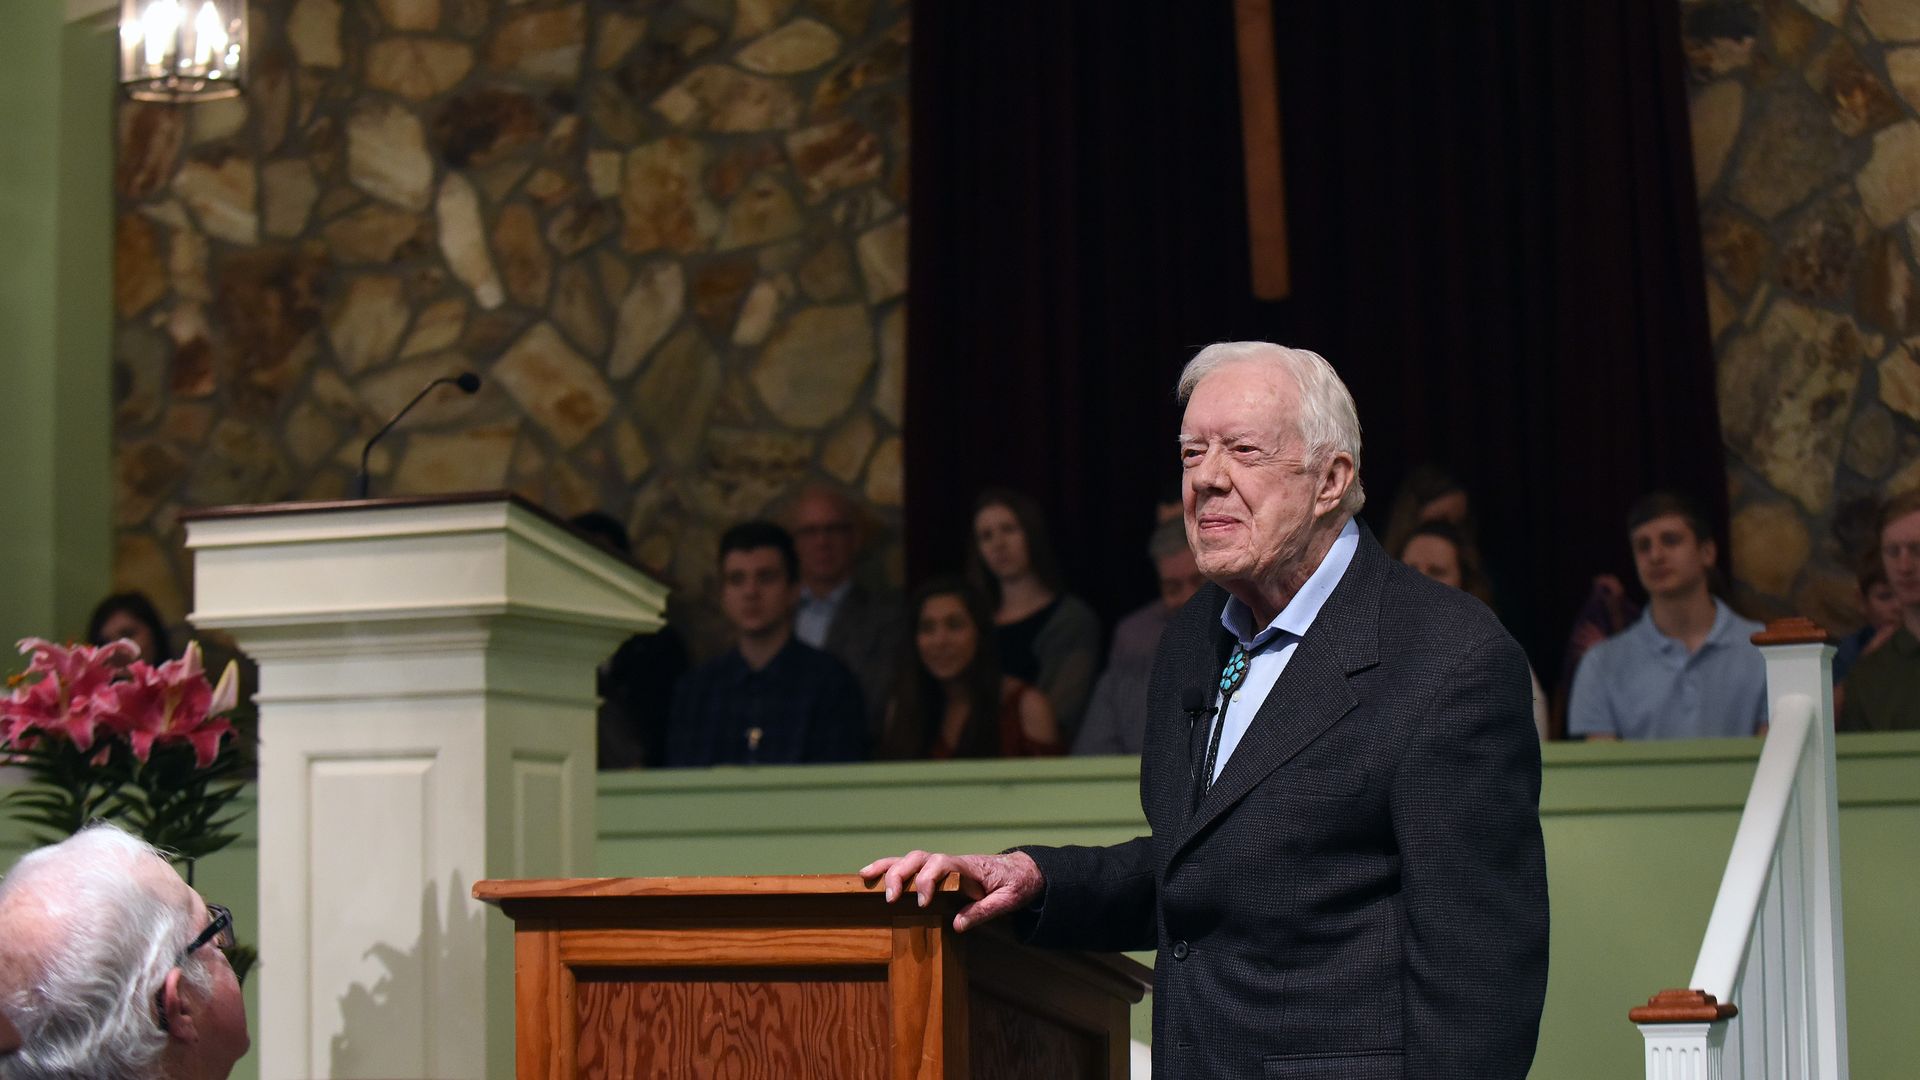 Former U.S. President Jimmy Carter speaks to the congregation at Maranatha Baptist Church before teaching Sunday school in his hometown of Plains, Georgia.